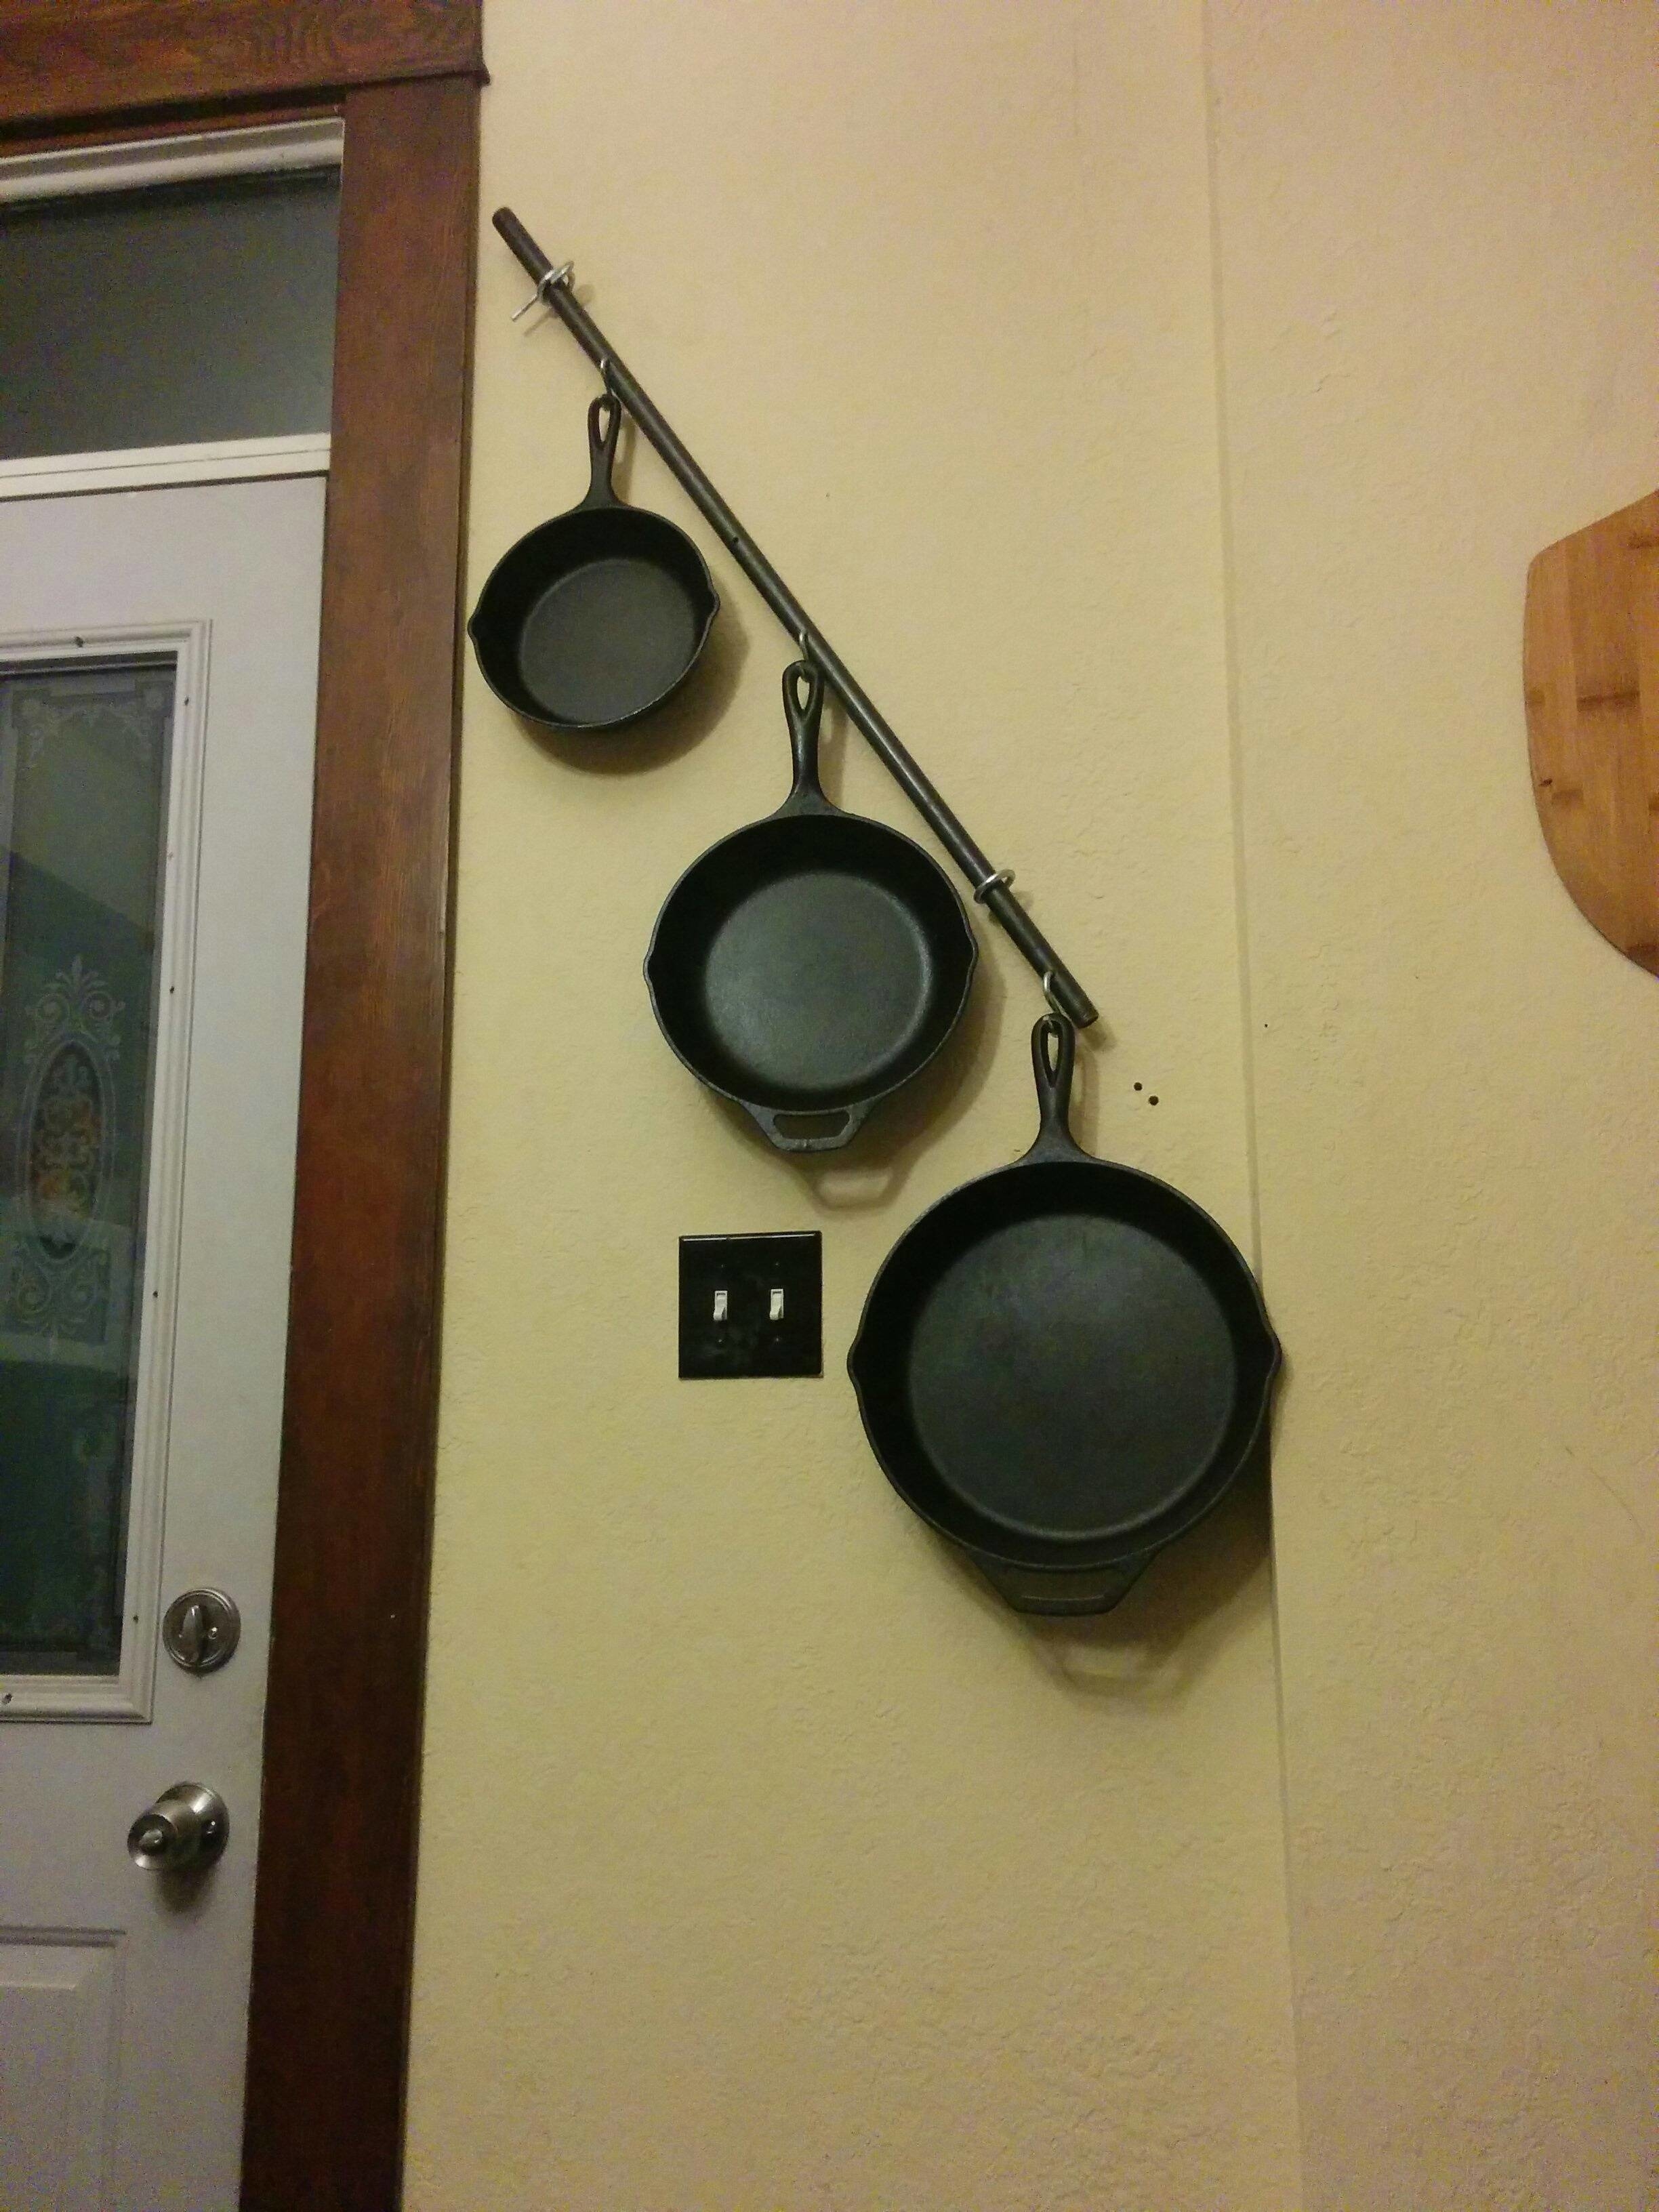 Set of three cast-iron pans hanging on a wall